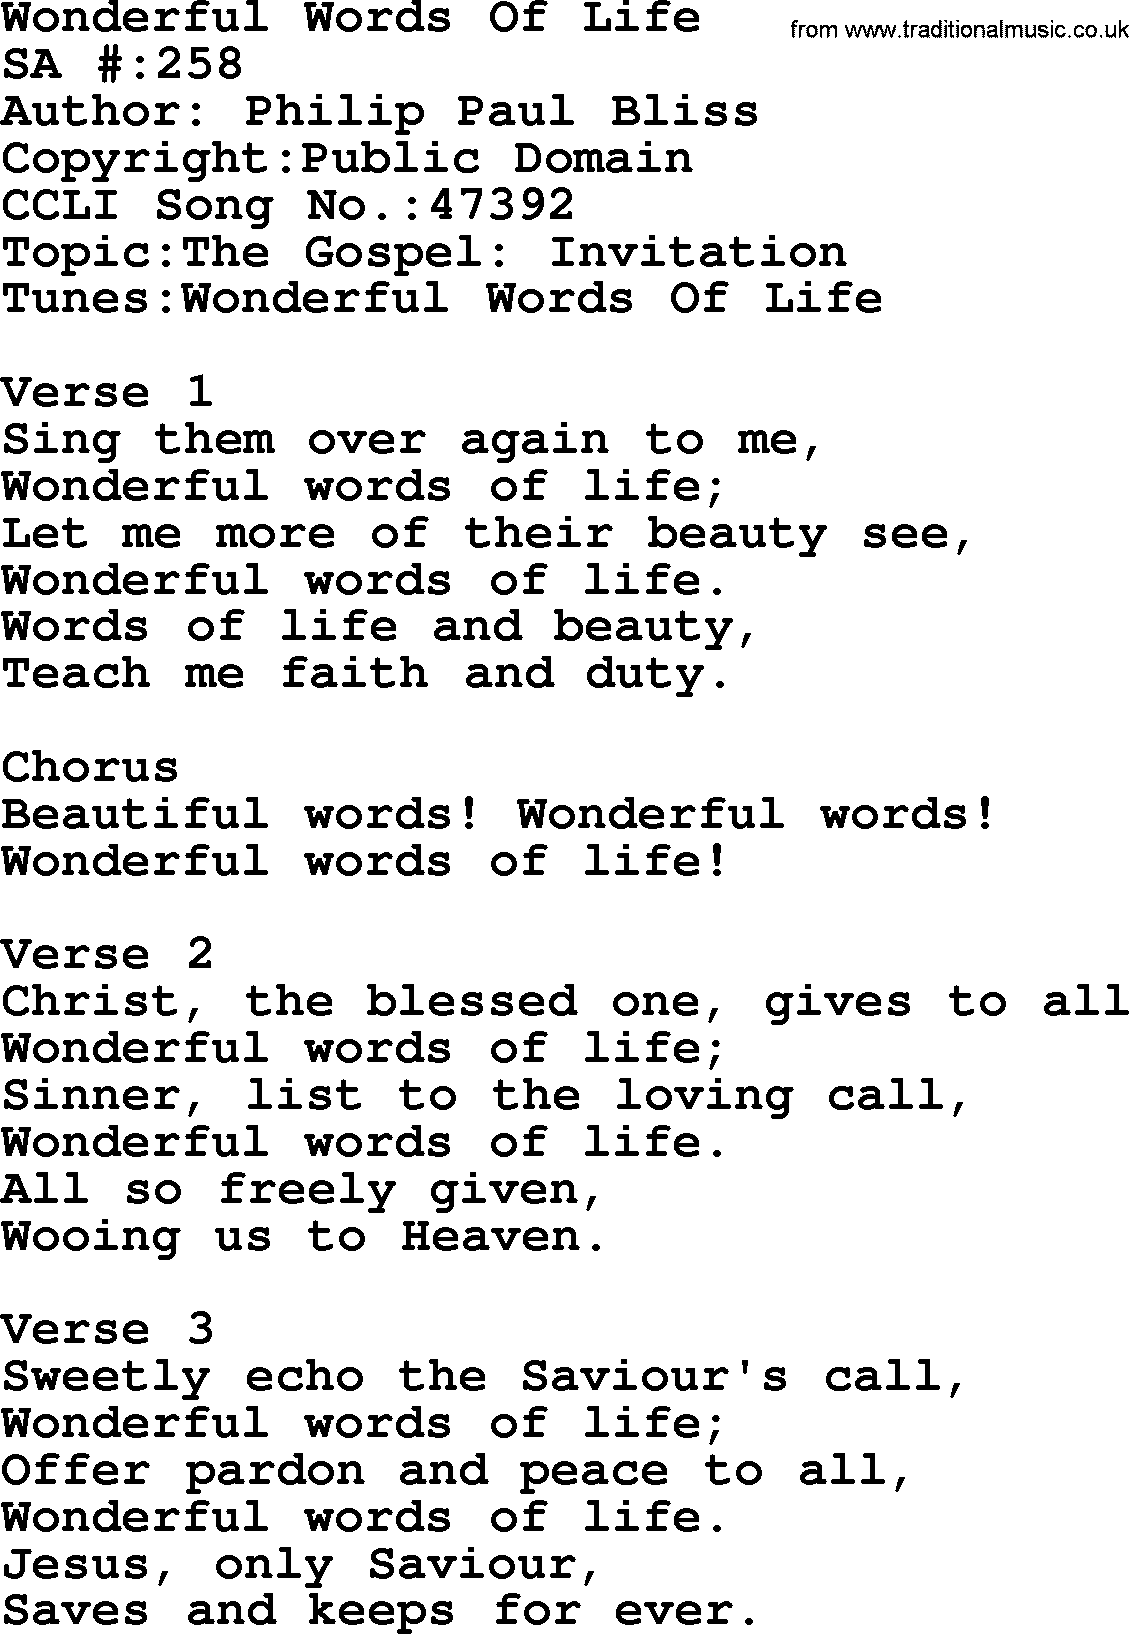 Salvation Army Hymnal, title: Wonderful Words Of Life, with lyrics and PDF,